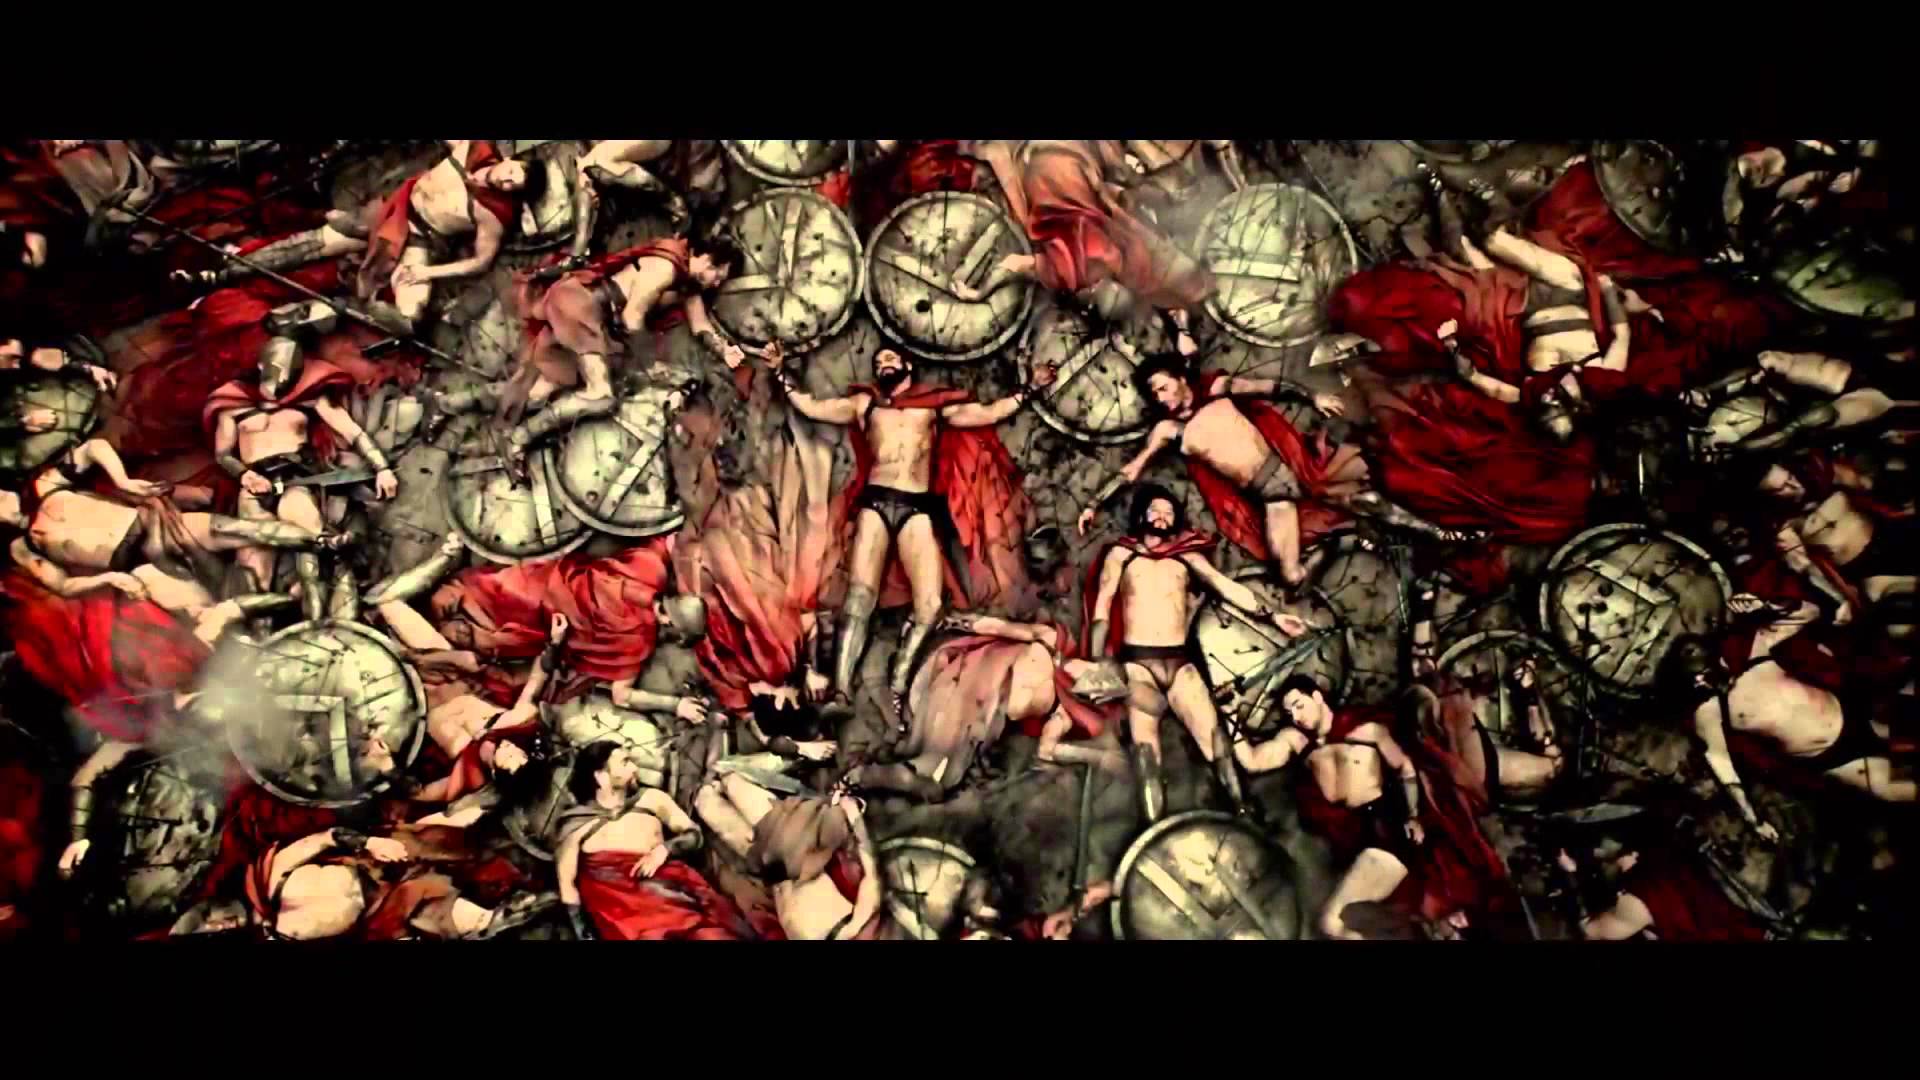 Extended Trailer: 300 – RISE OF AN EMPIRE